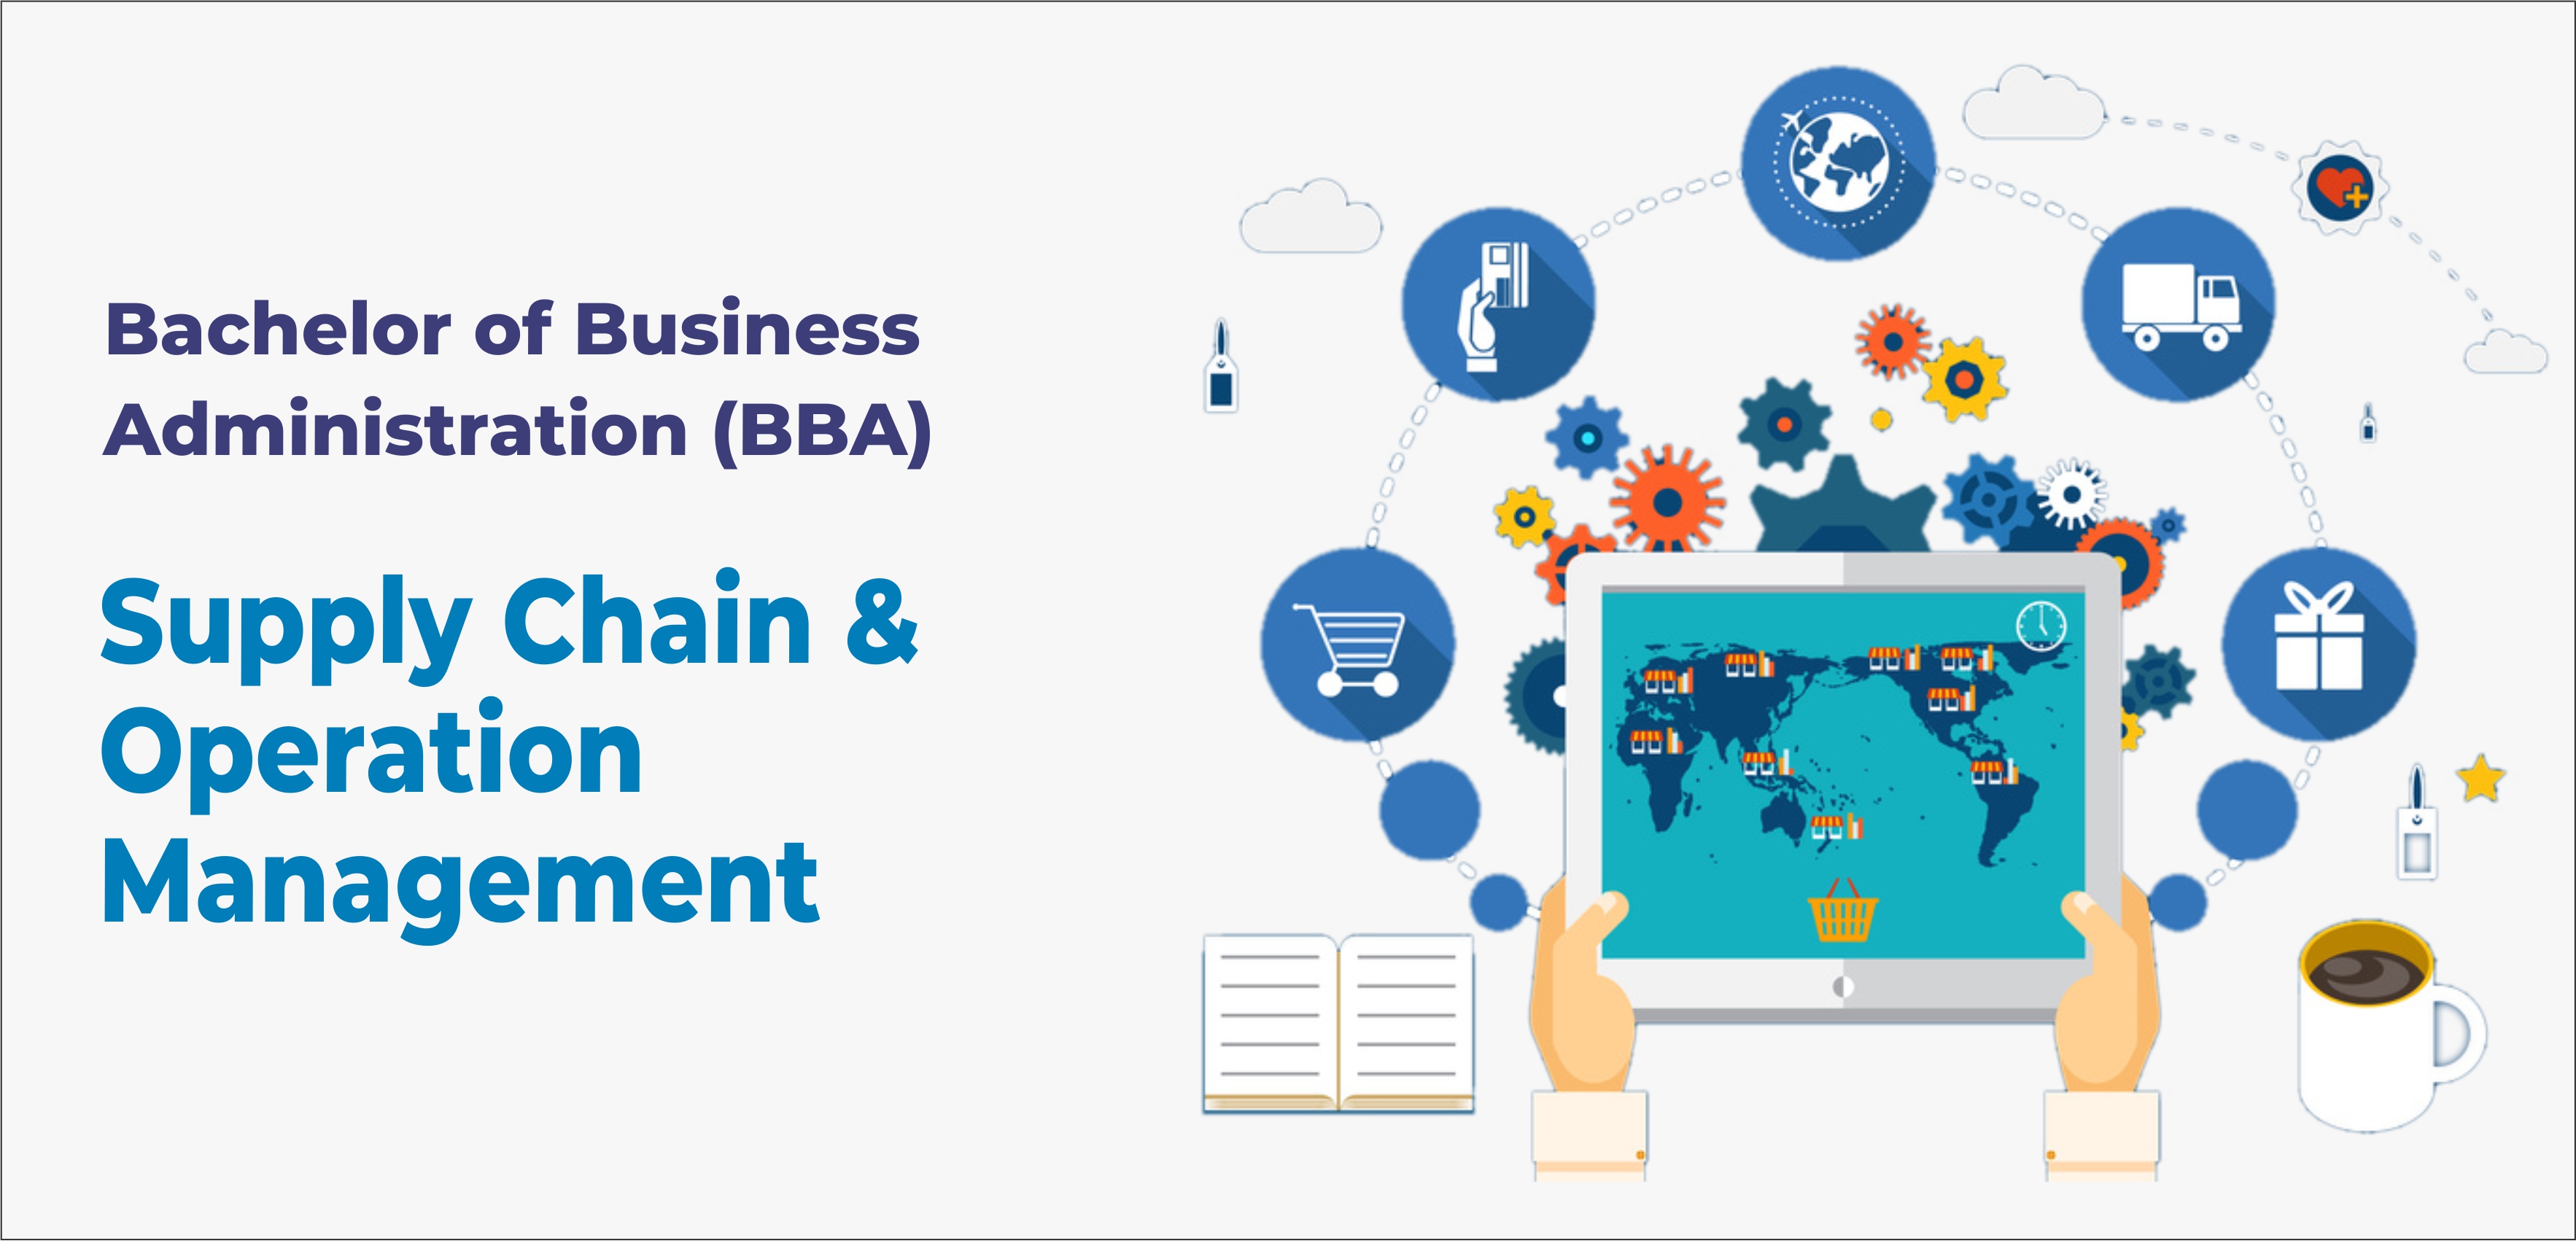 BBA: Supply Chain & Operation Management